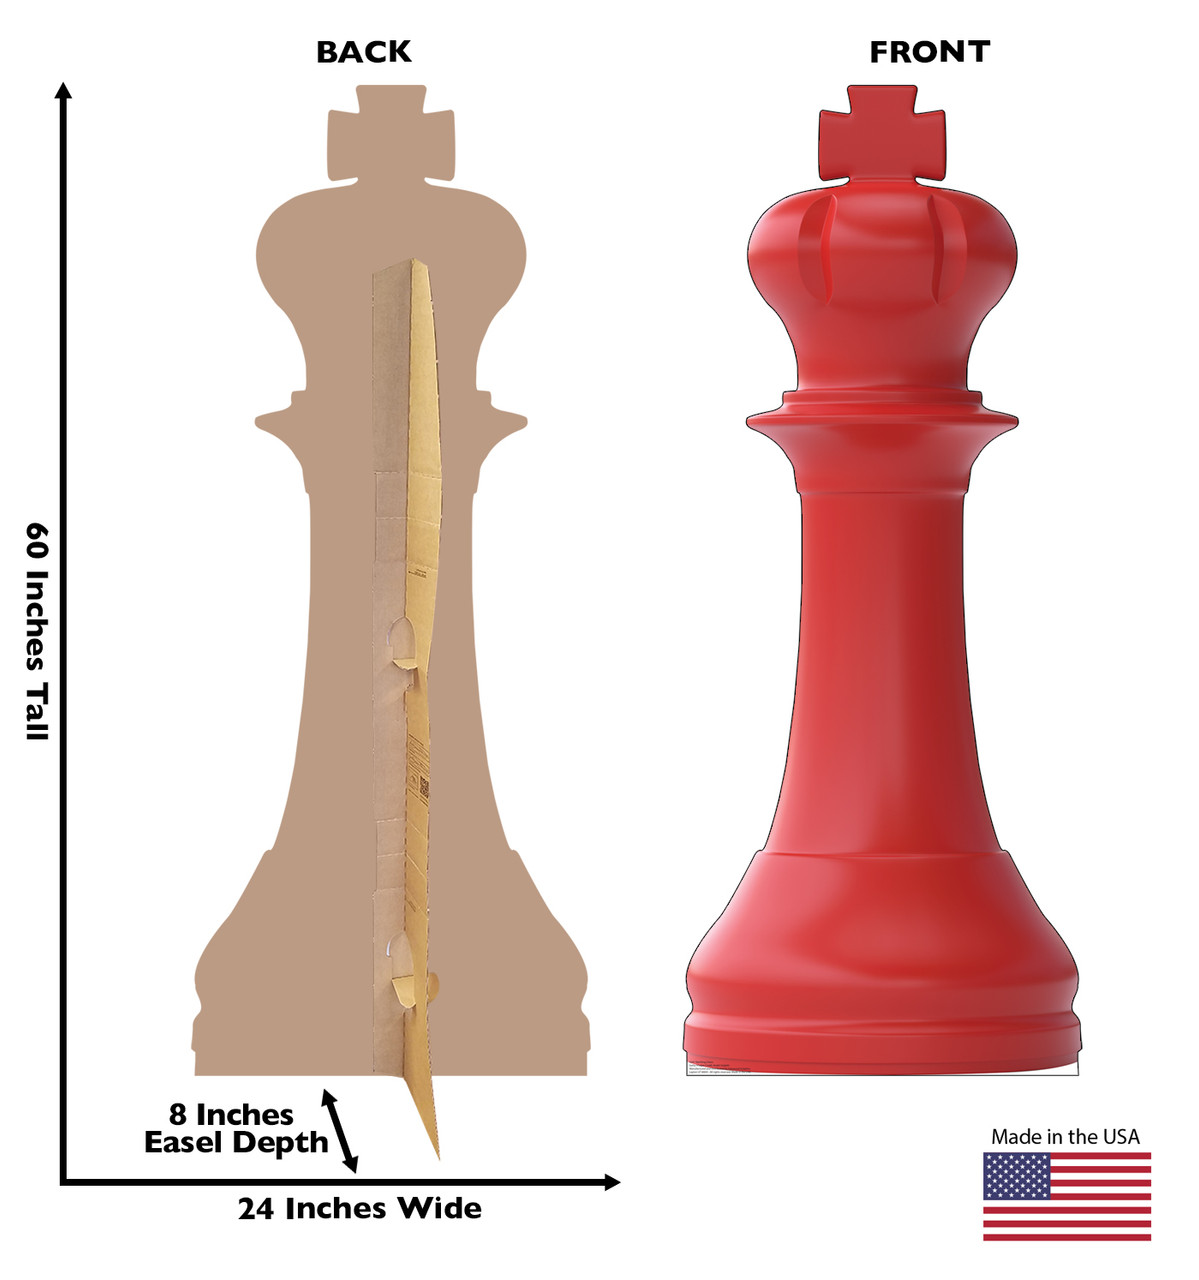 Life-size cardboard standee of a Red King Chess with back and front dimensions.